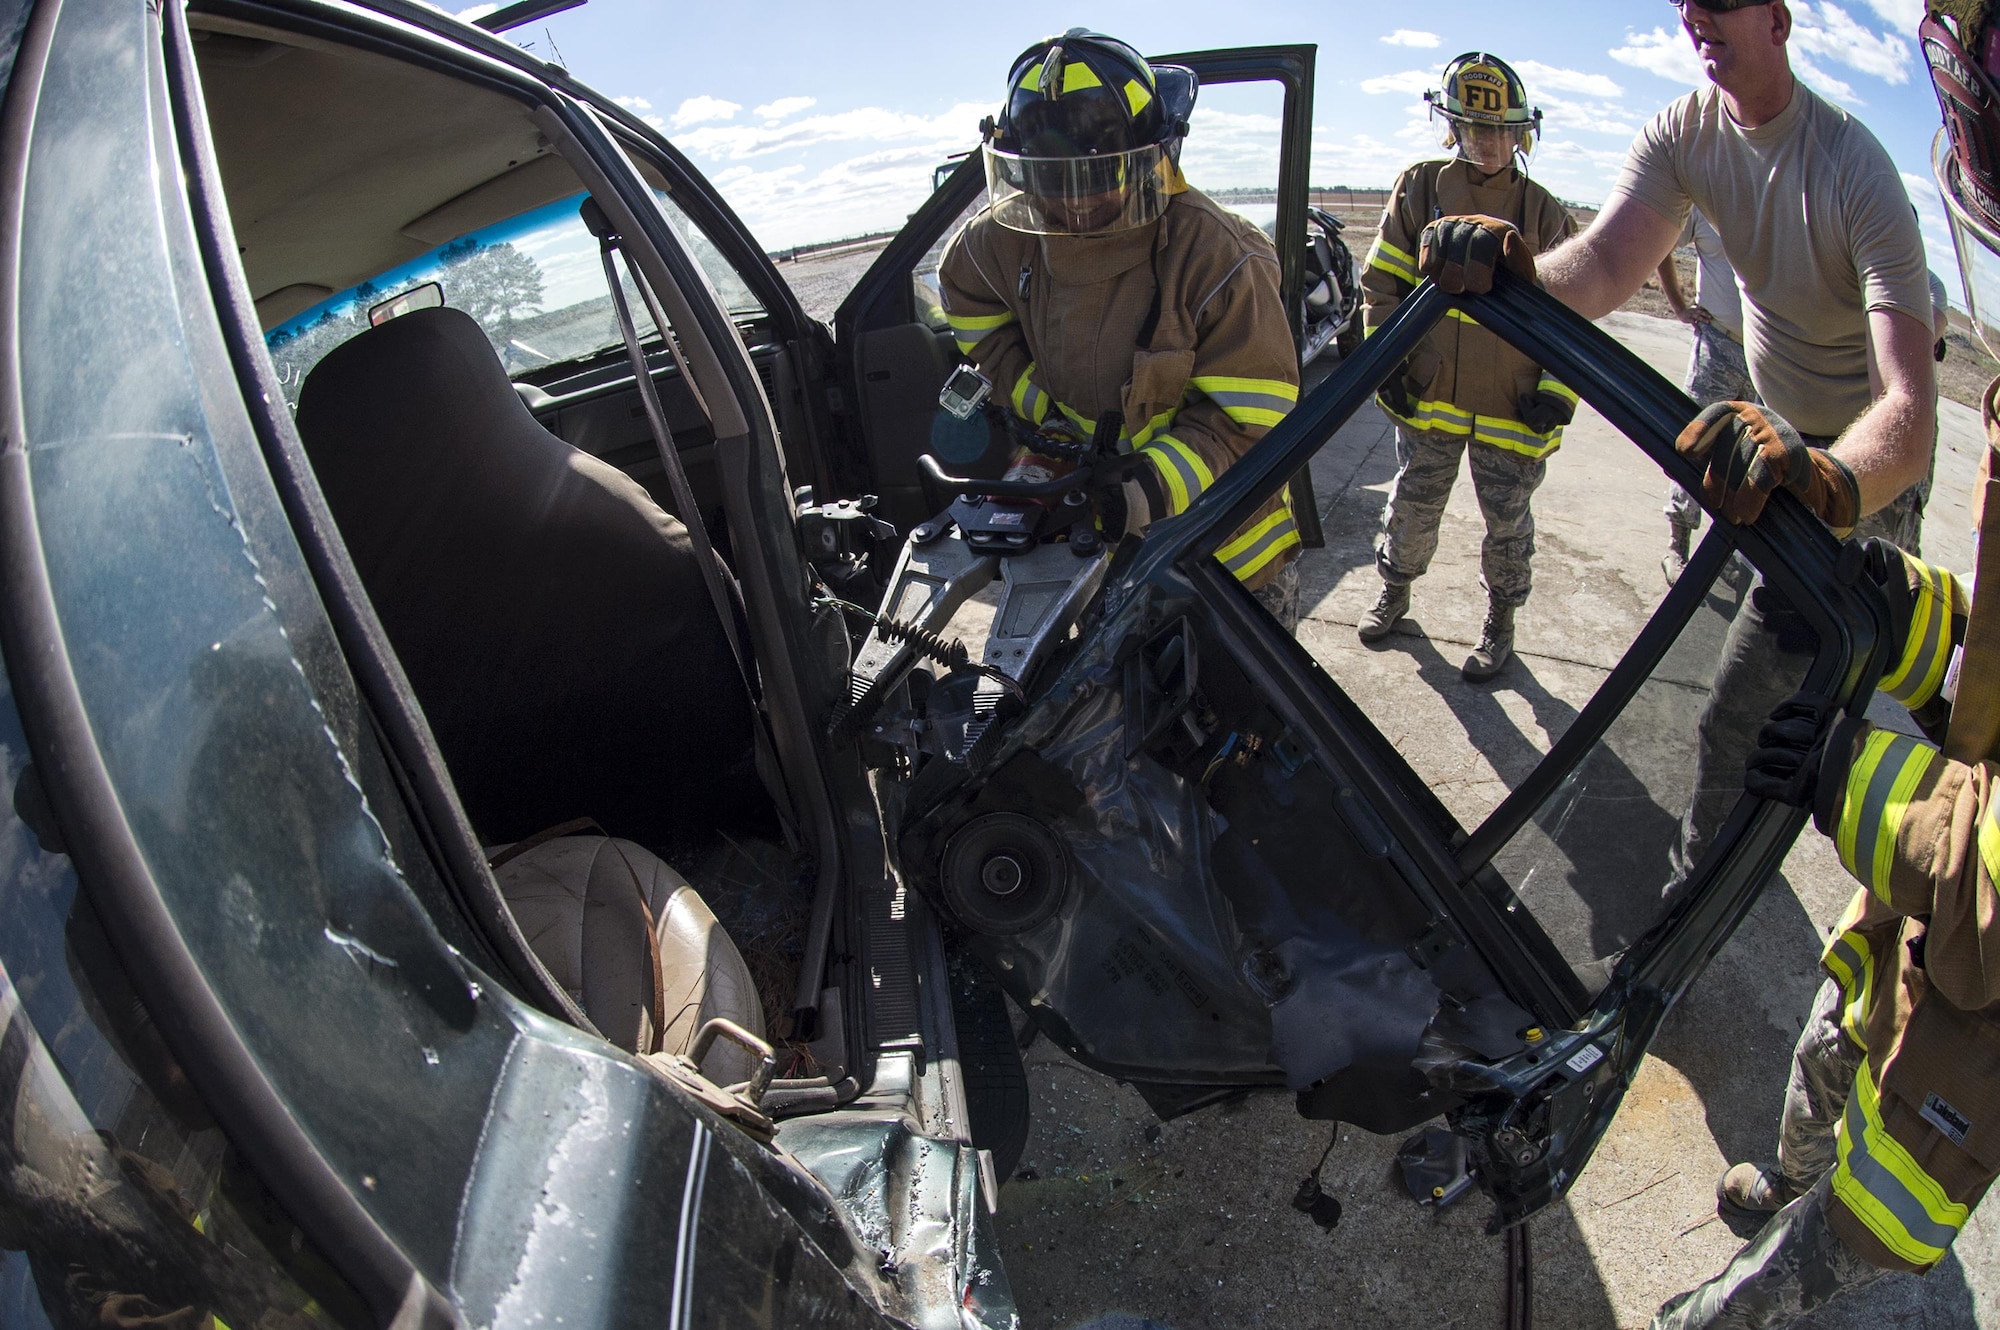 A participant uses a spreader, also known as the jaws of life, during Vehicle Extrication training, Jan. 13, 2017, at Moody Air Force Base, Ga. The spreader is used to pull pieces of the vehicle apart, but when removing doors, placement is just as important as power. (U.S. Air Force photo by Airman 1st Class Janiqua P. Robinson)
